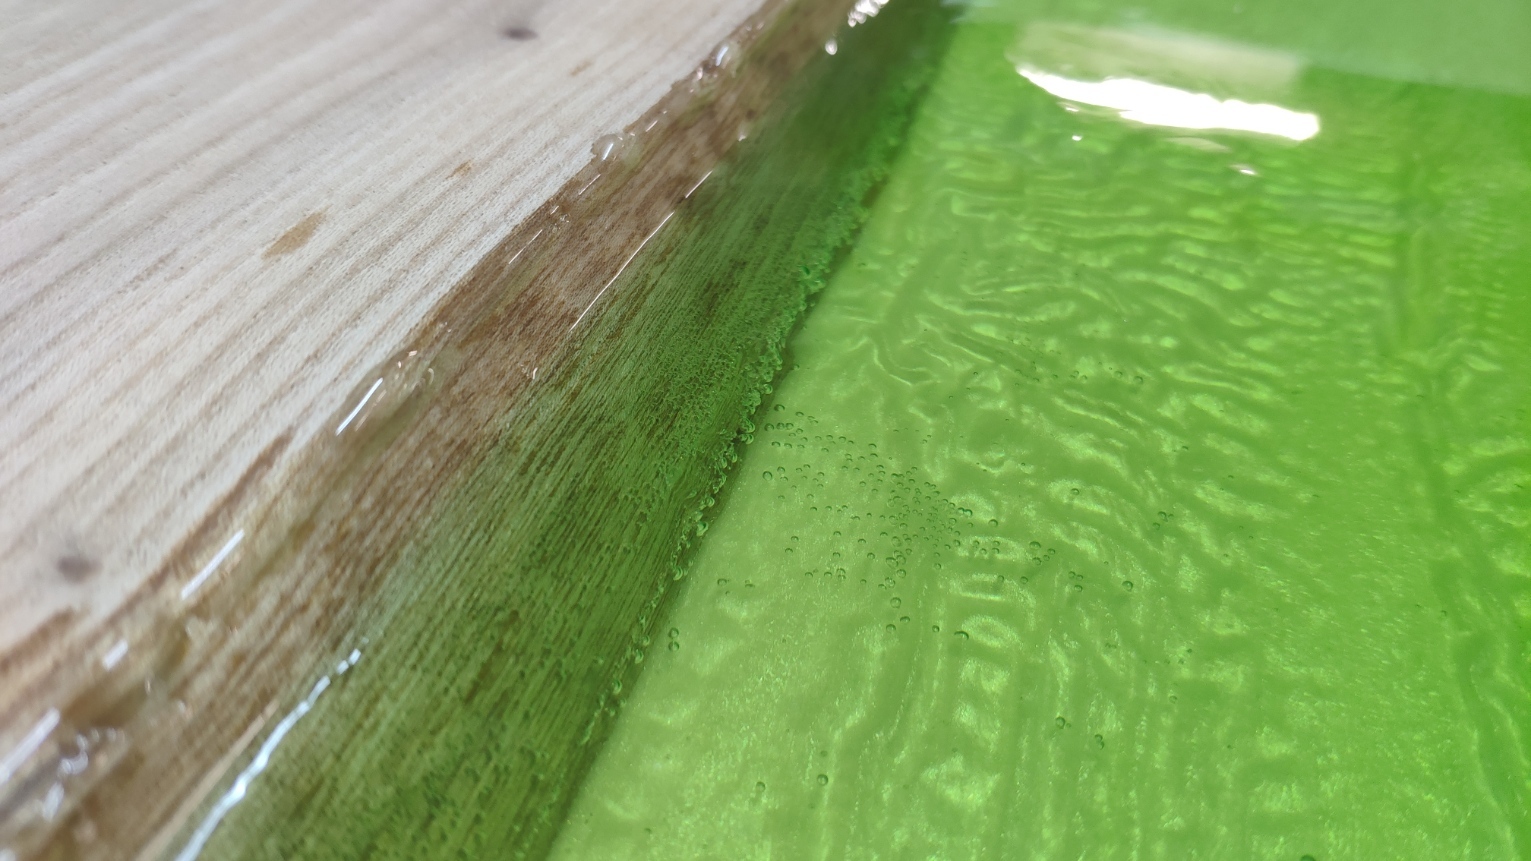 How Volodka made the table-river - My, Longpost, Epoxy resin, Table-River, Error, Experience, Video